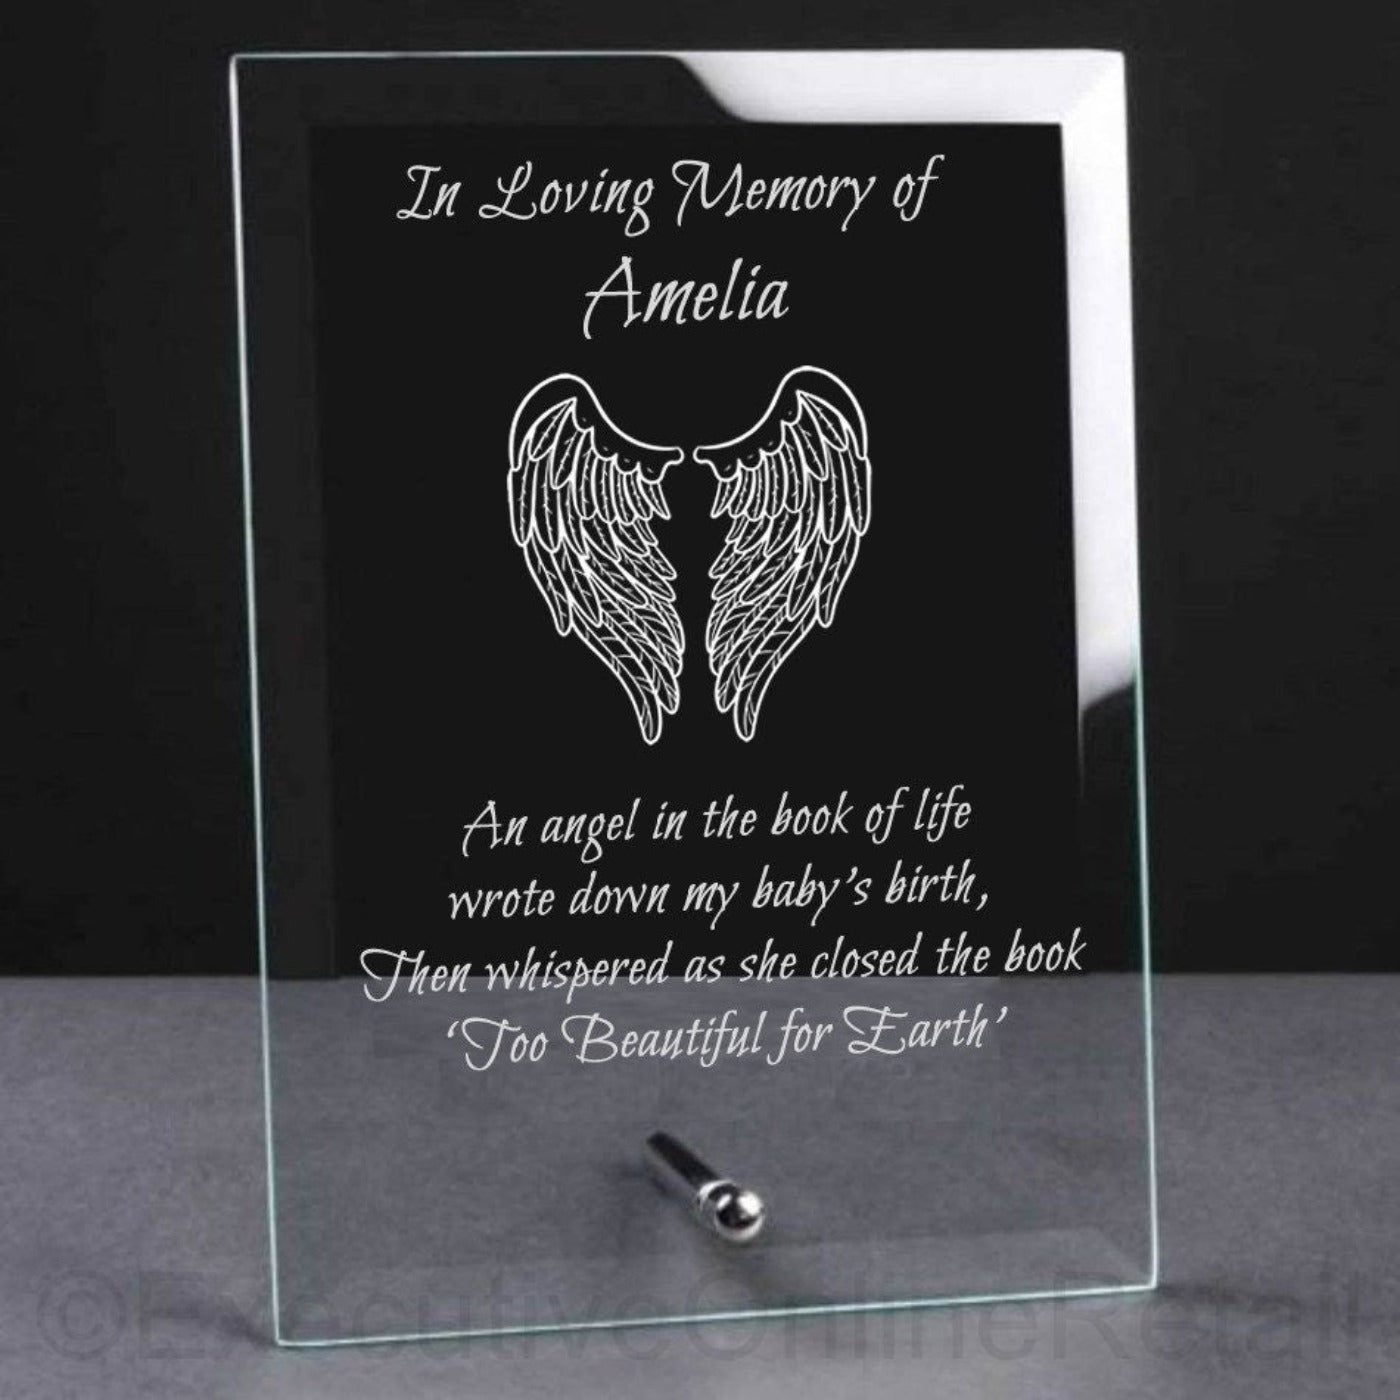 Engraved Glass Remembrace Plaque for Baby Memorial